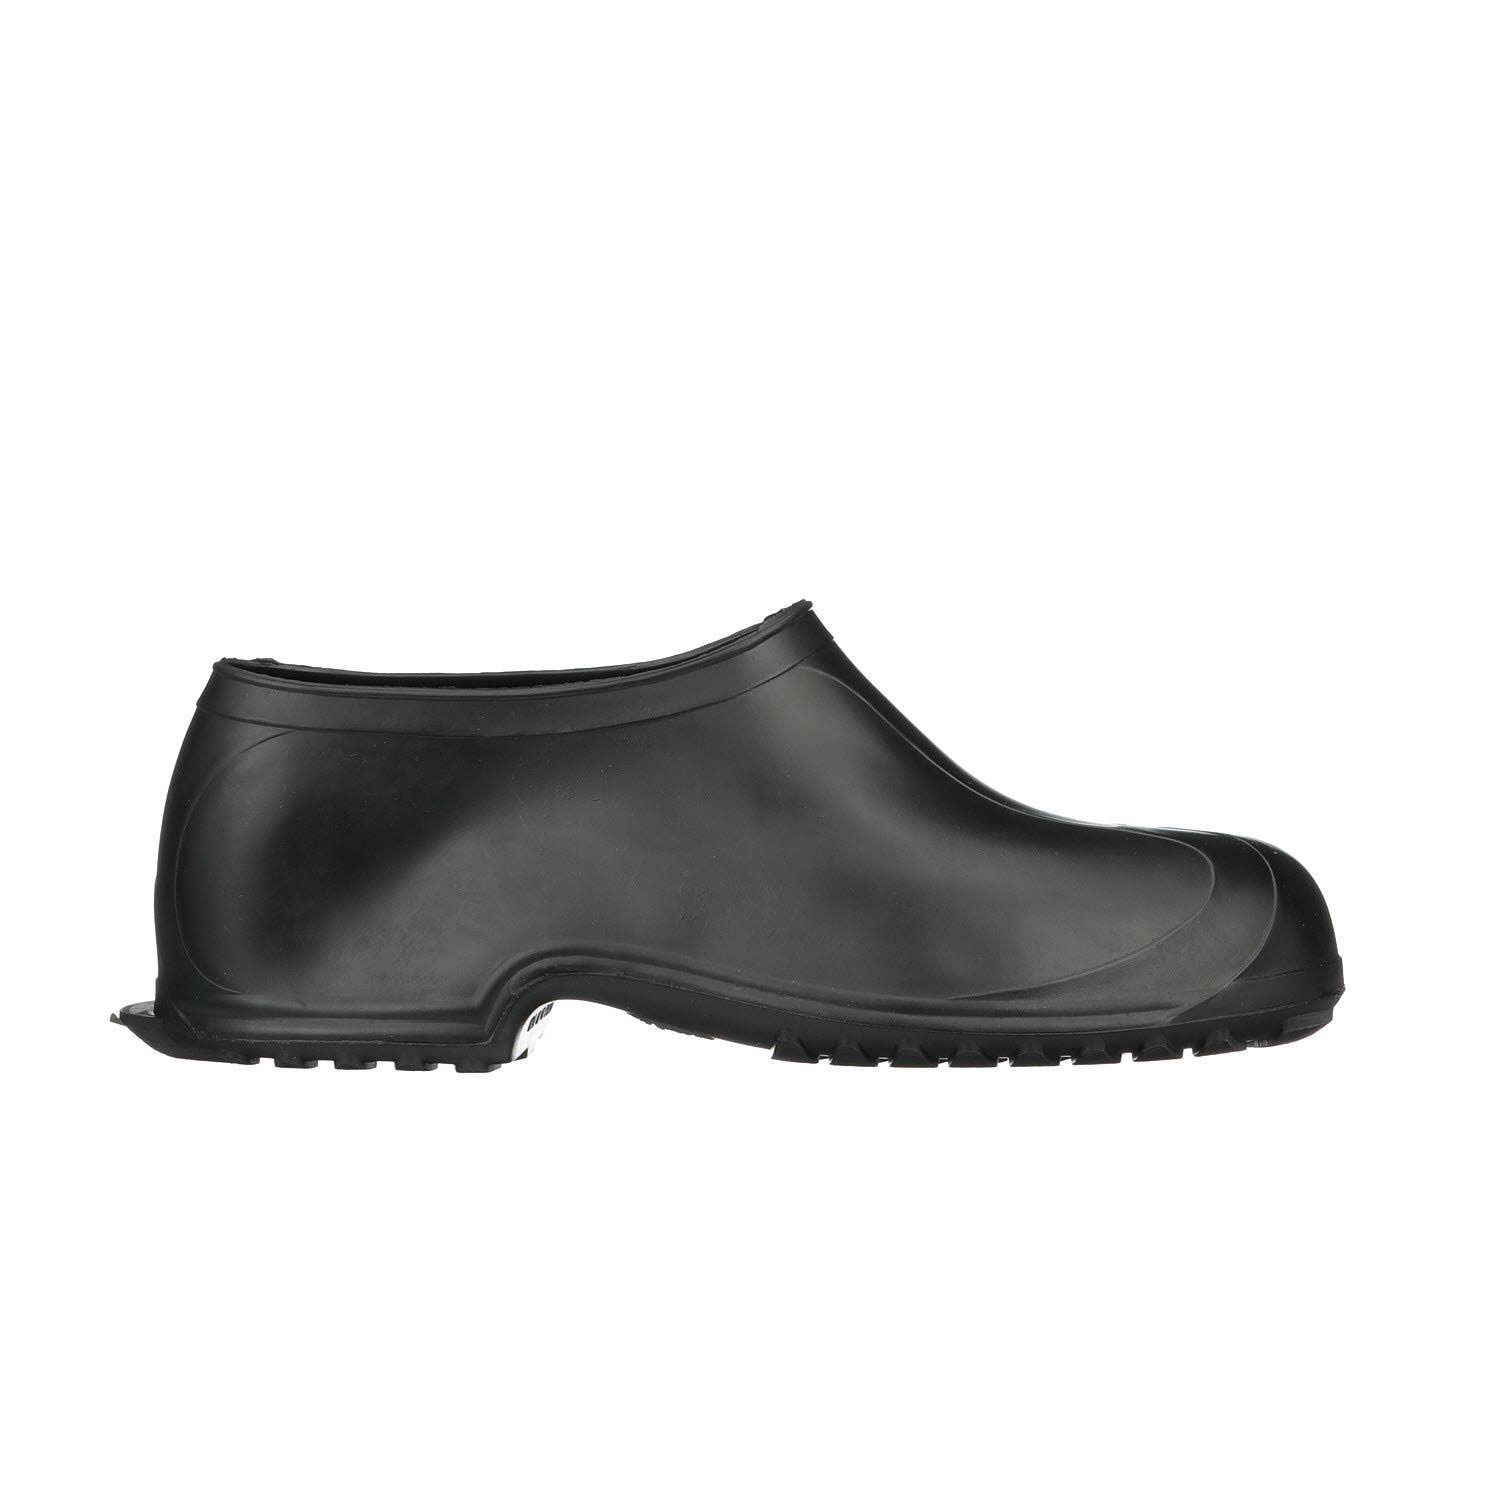 Tingley Original Hi-top Work Rubber - Cleated Outsole - Black [2300 ...